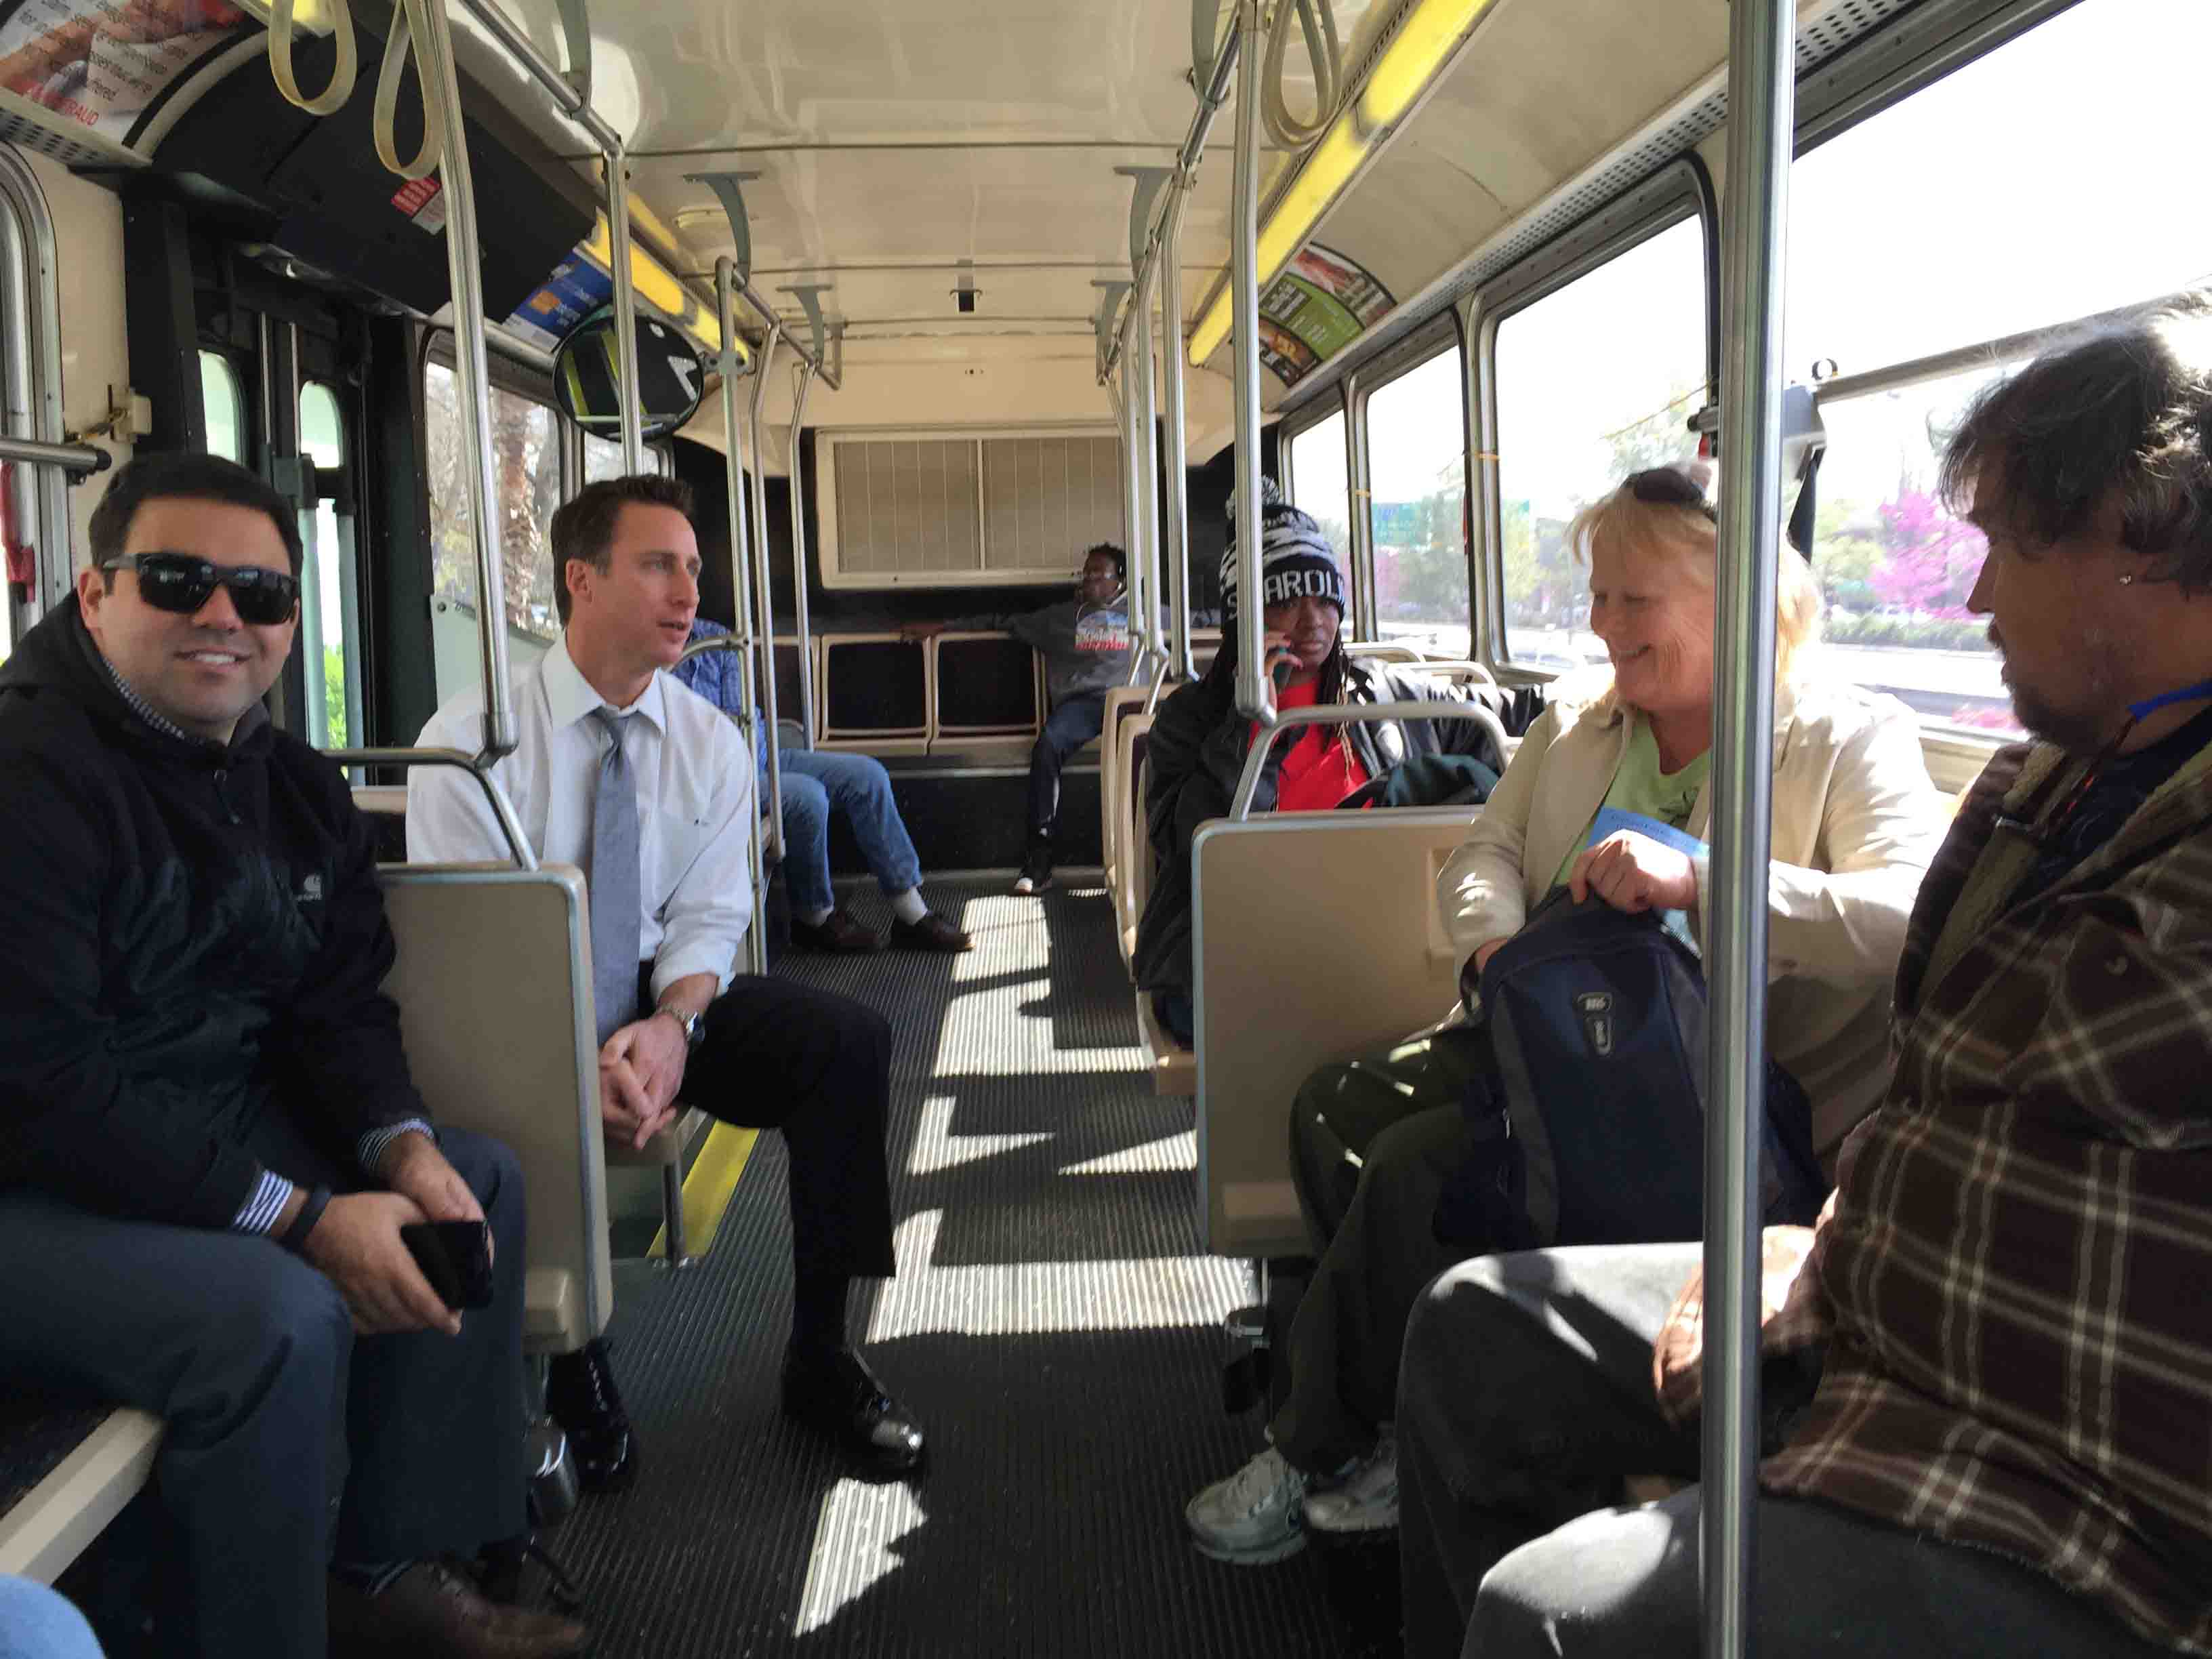 Town of Mount Pleasant administrator riding bus with residents